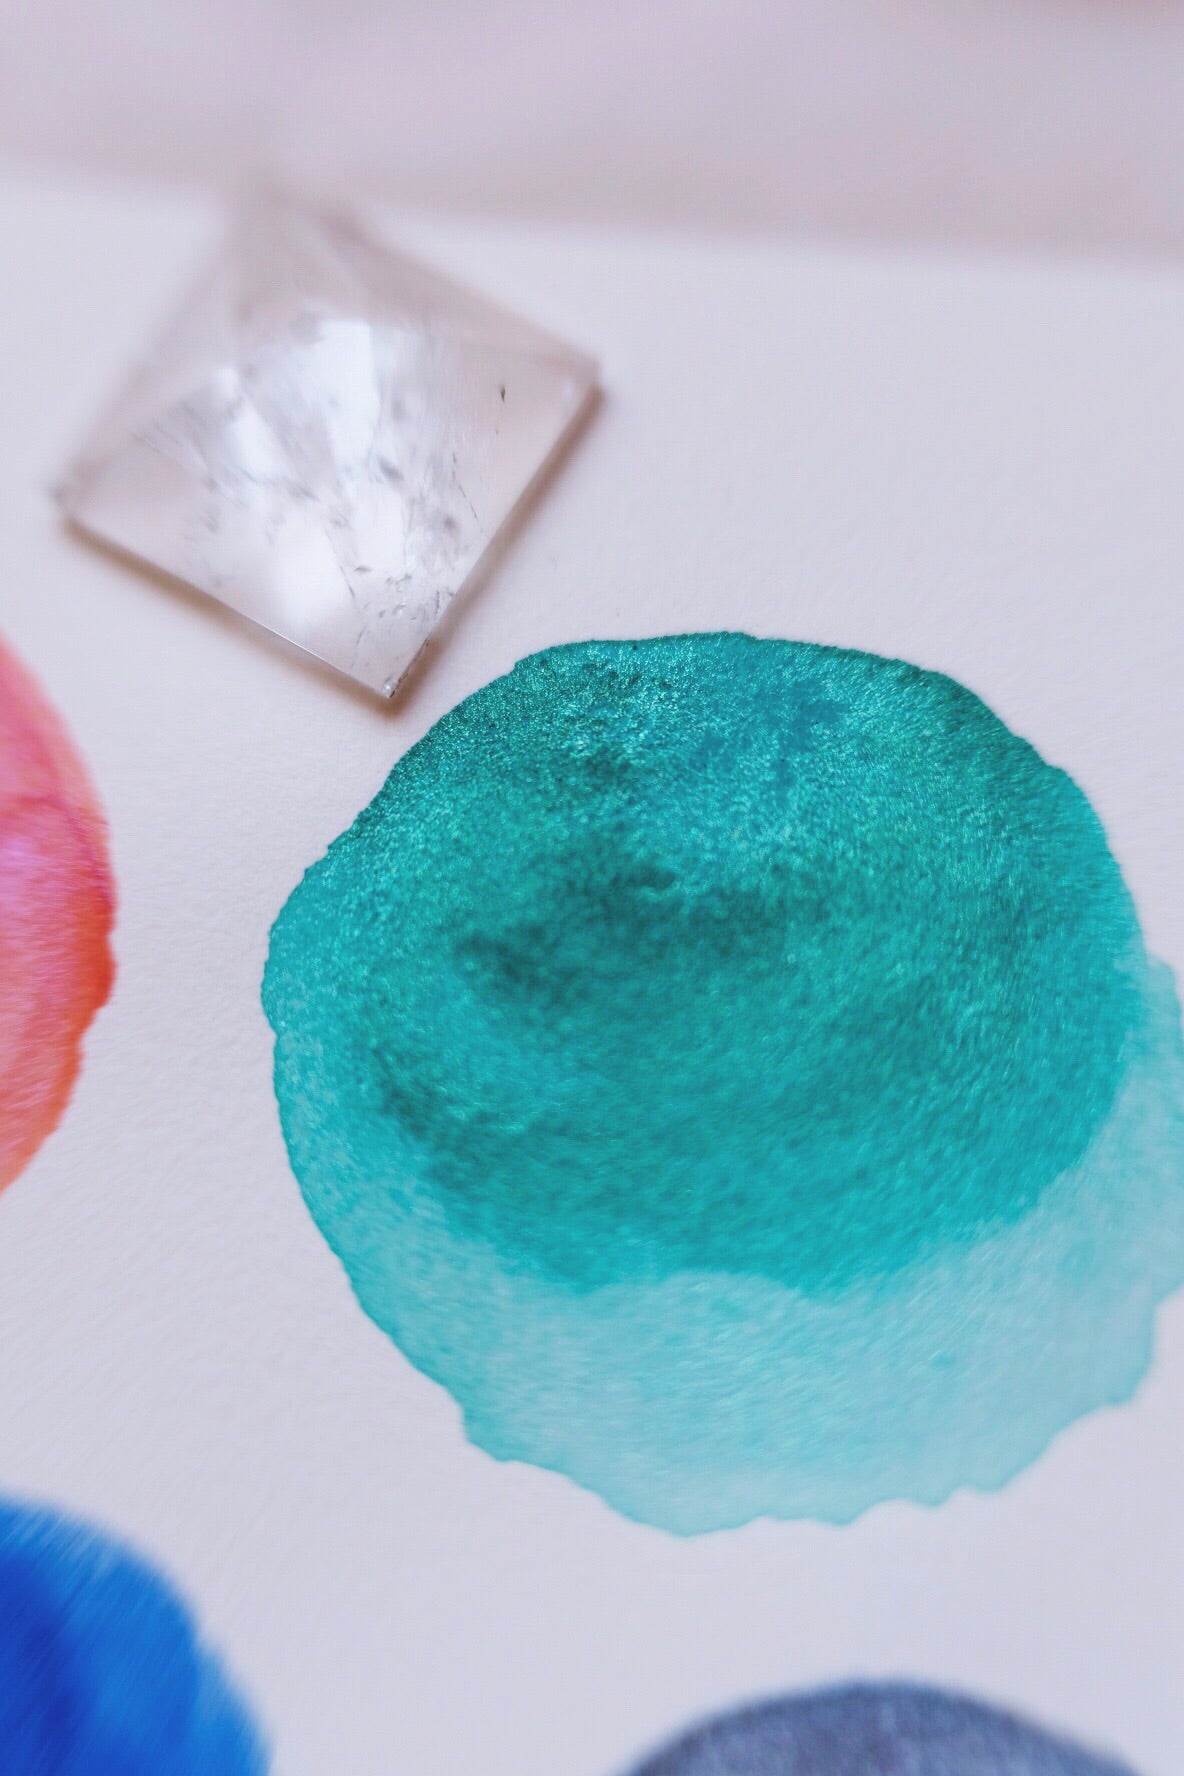 RESERVED for Jan + Moons of Saturn + Limited Edition Mineral shimmer watercolor palette